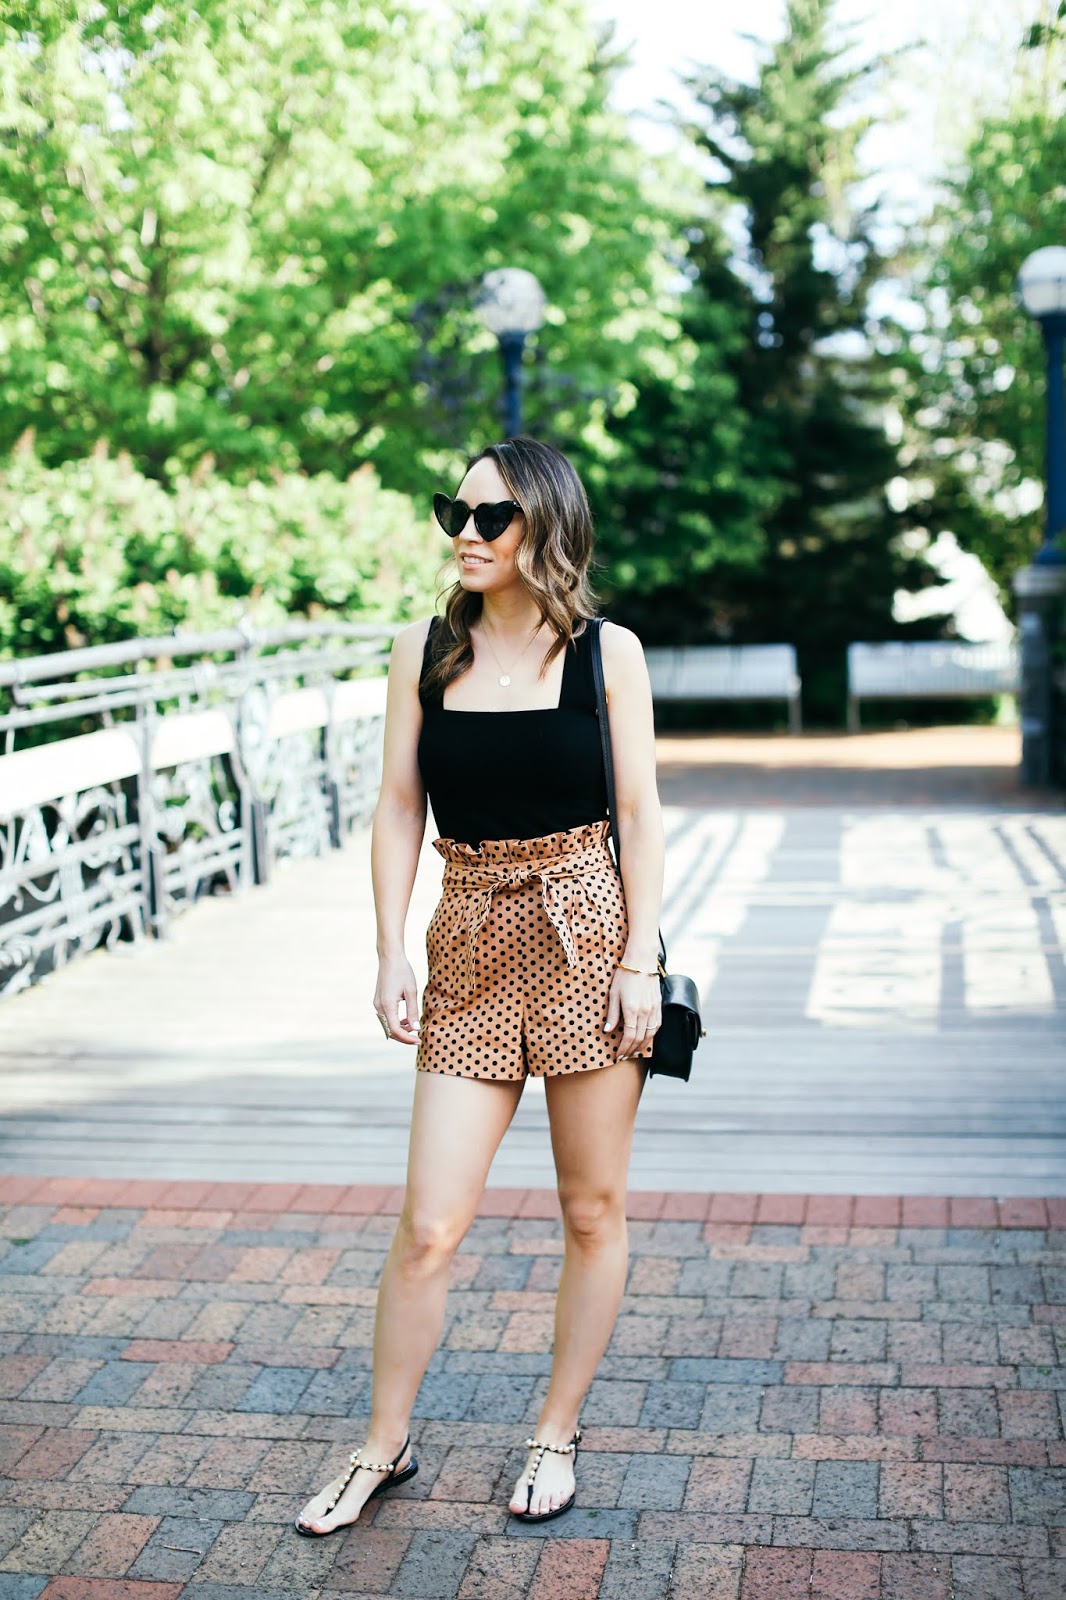 The Style of Shorts That Looks the Most Flattering - alittlebitetc